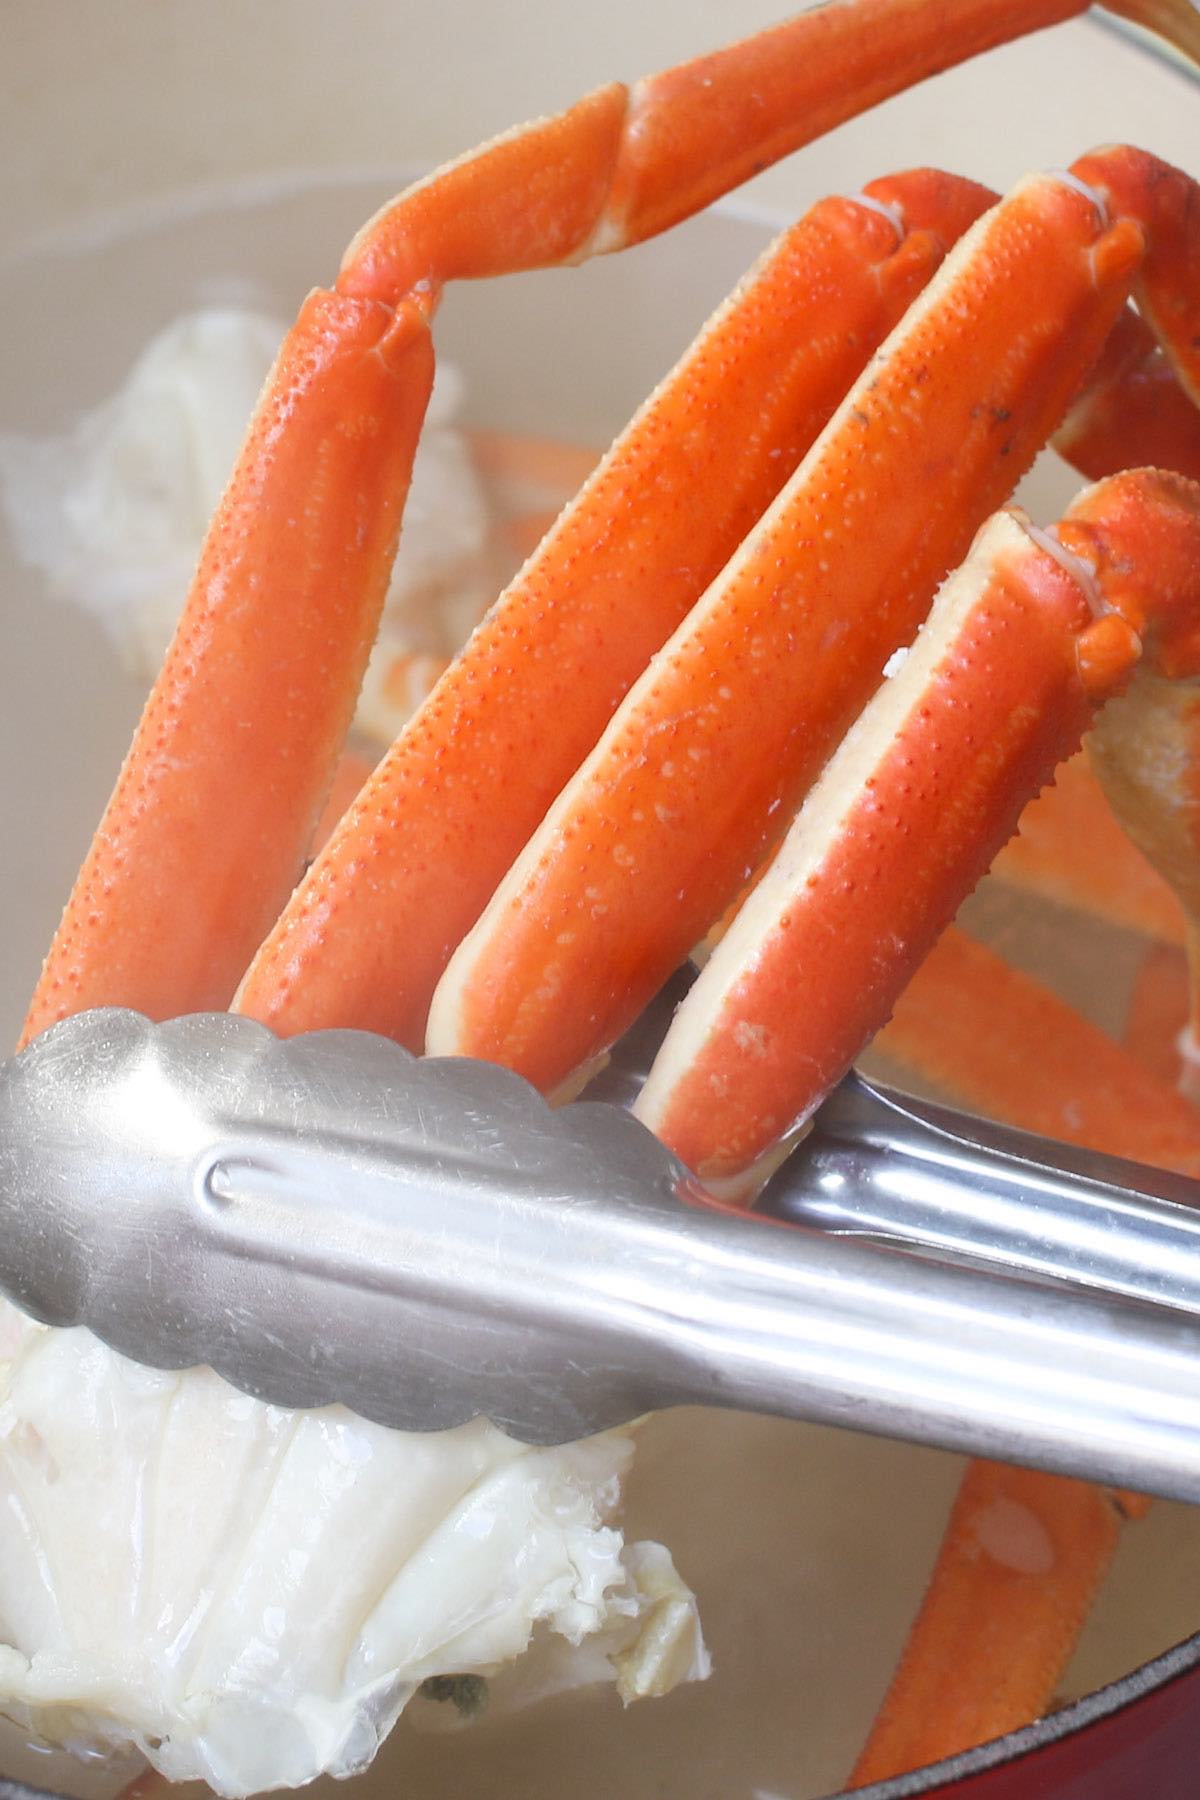 If you’re treating yourself to crab legs, you want to prepare them so they’re perfectly cooked. In today’s post we’re sharing some tips on how to boil crab legs as well as a simple recipe that takes just 10 minutes.